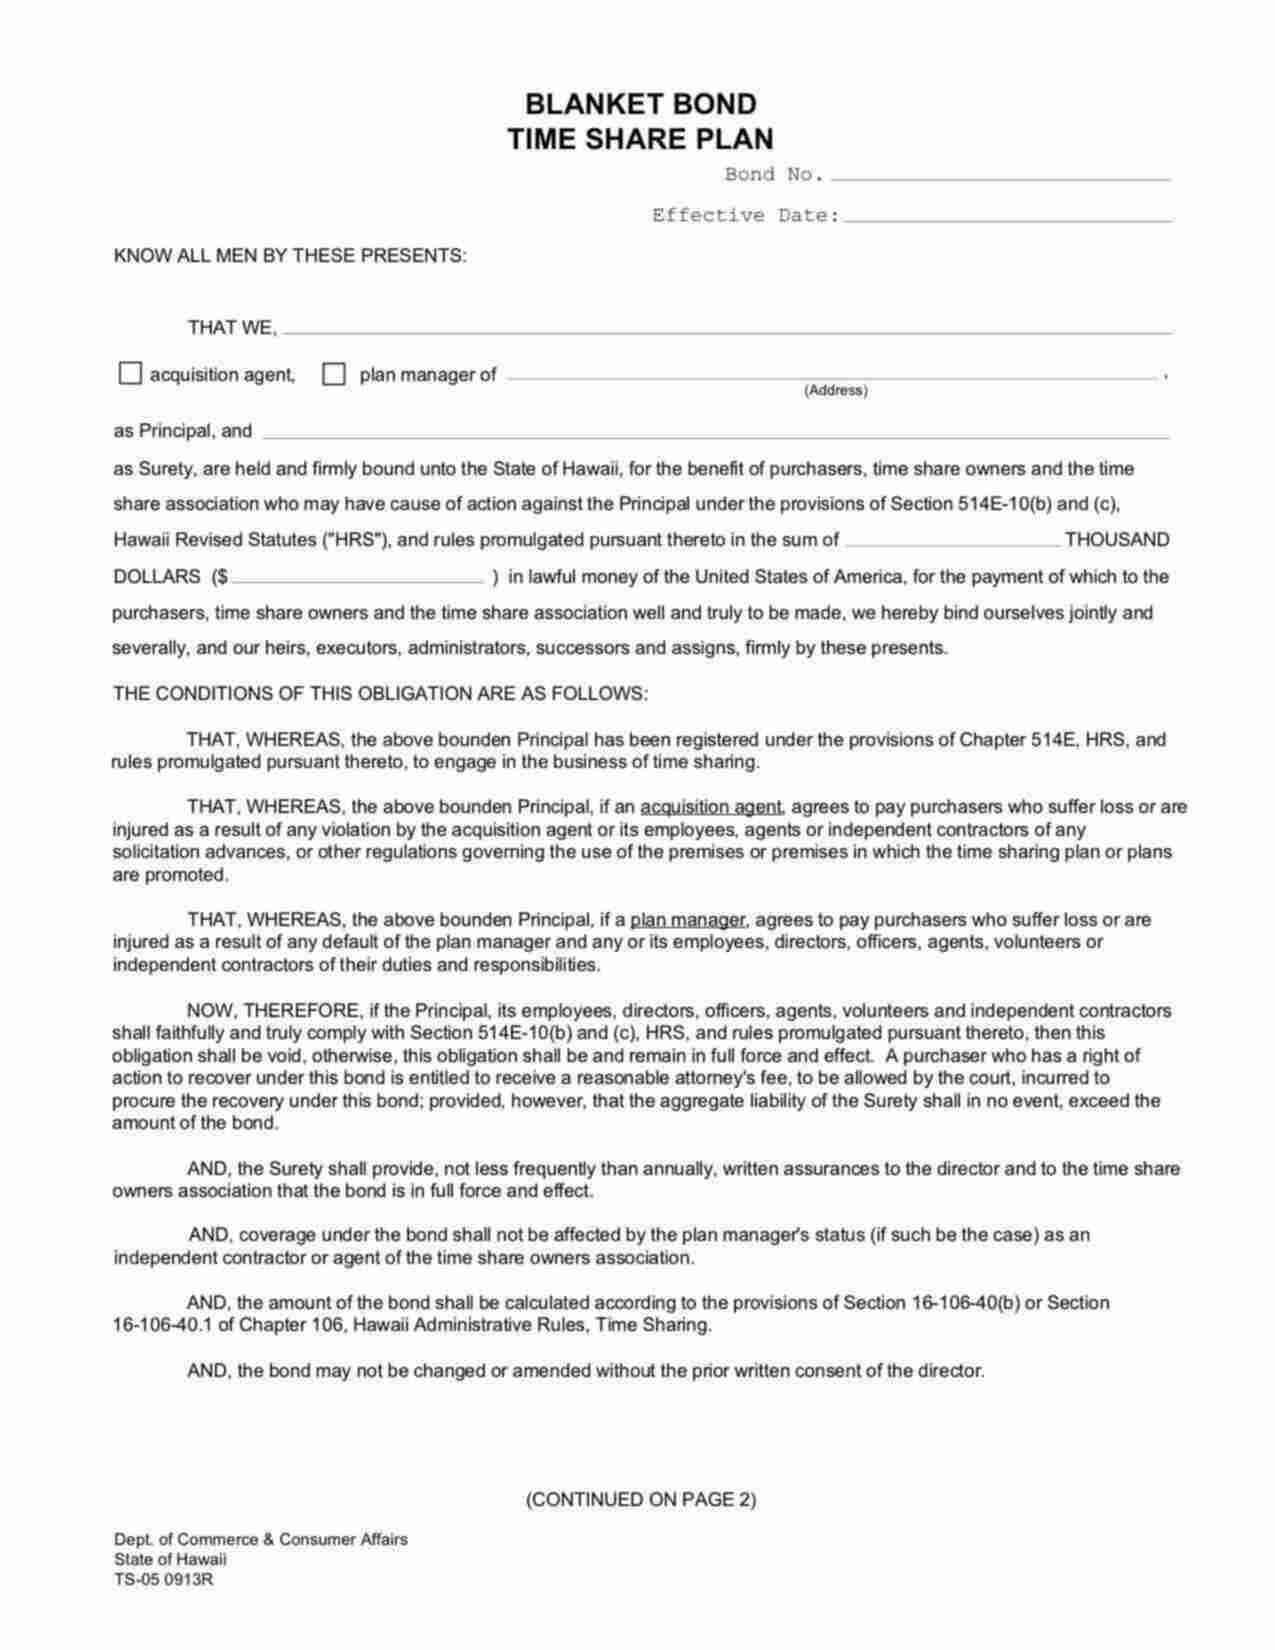 Hawaii Time Share Plan Manager Bond Form